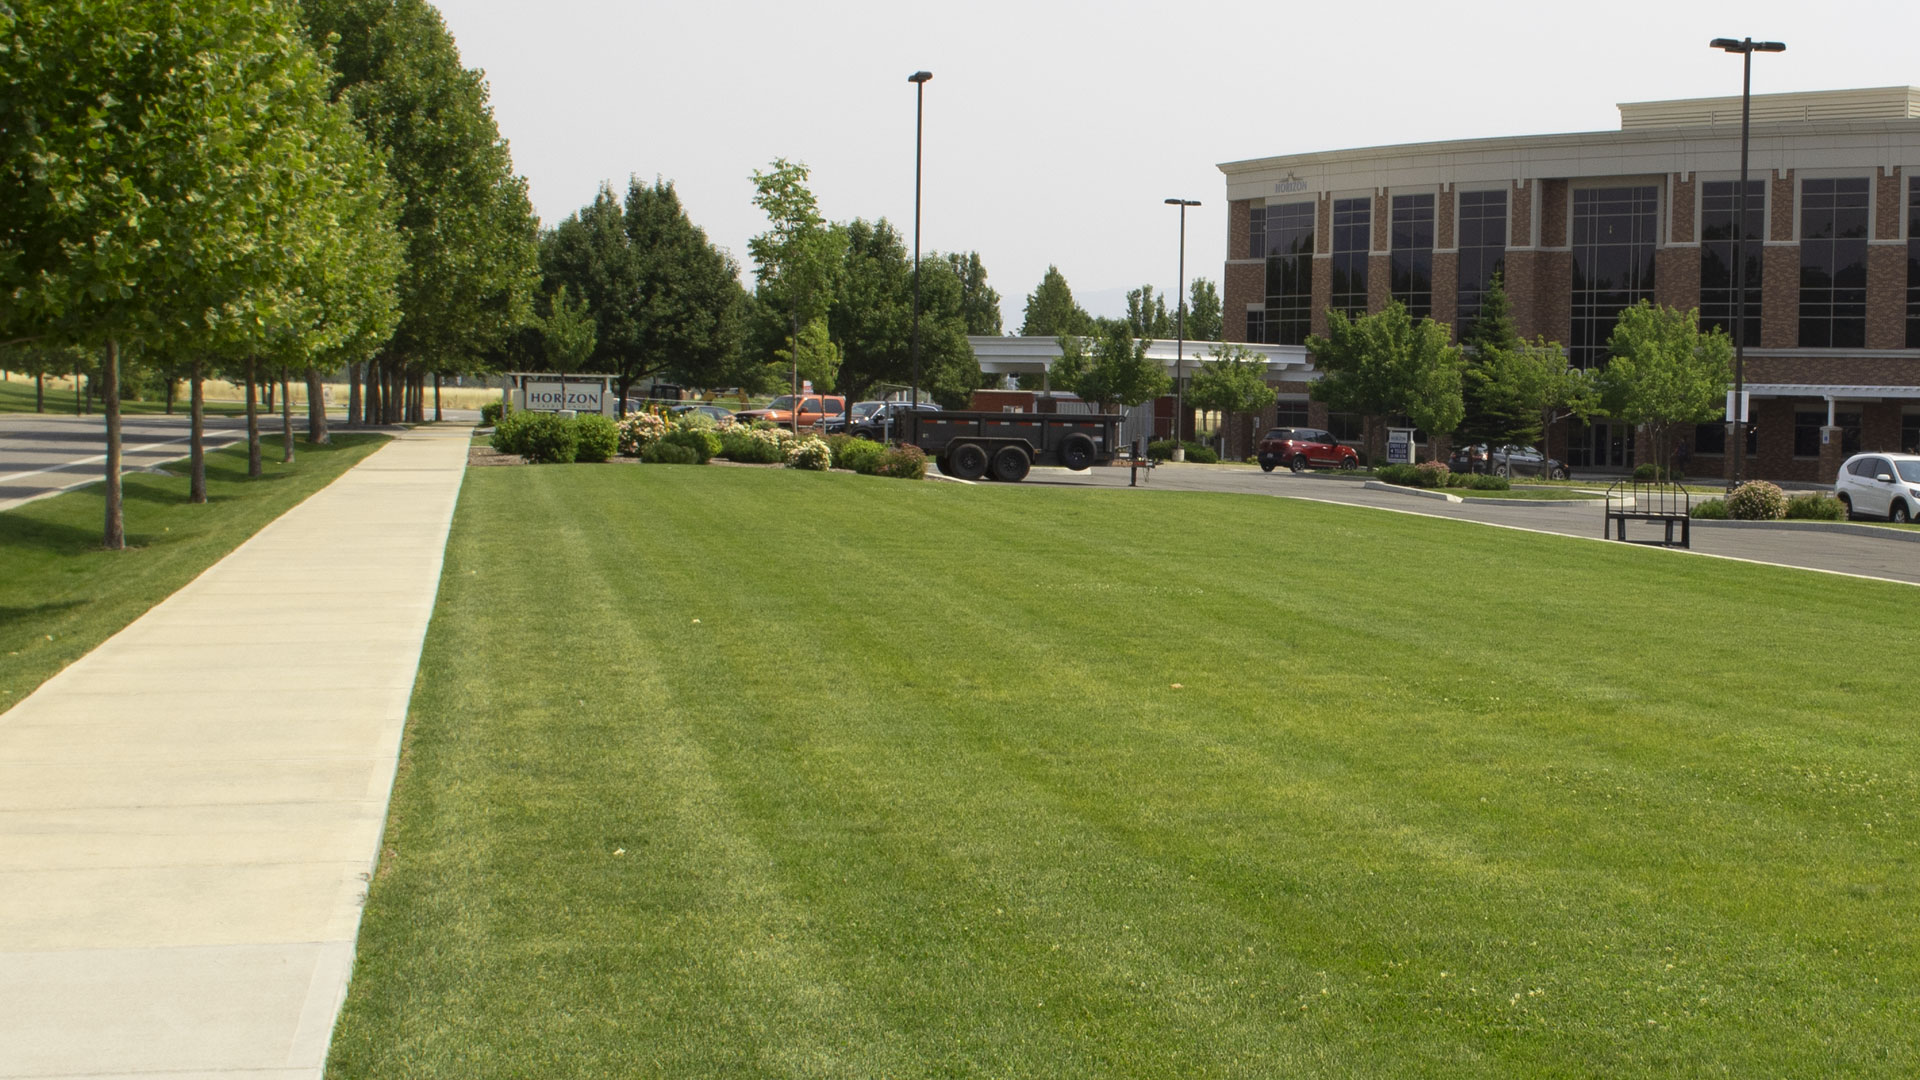 A healthy commercial lawn in Spokane, WA using our fertilization and weed control services.